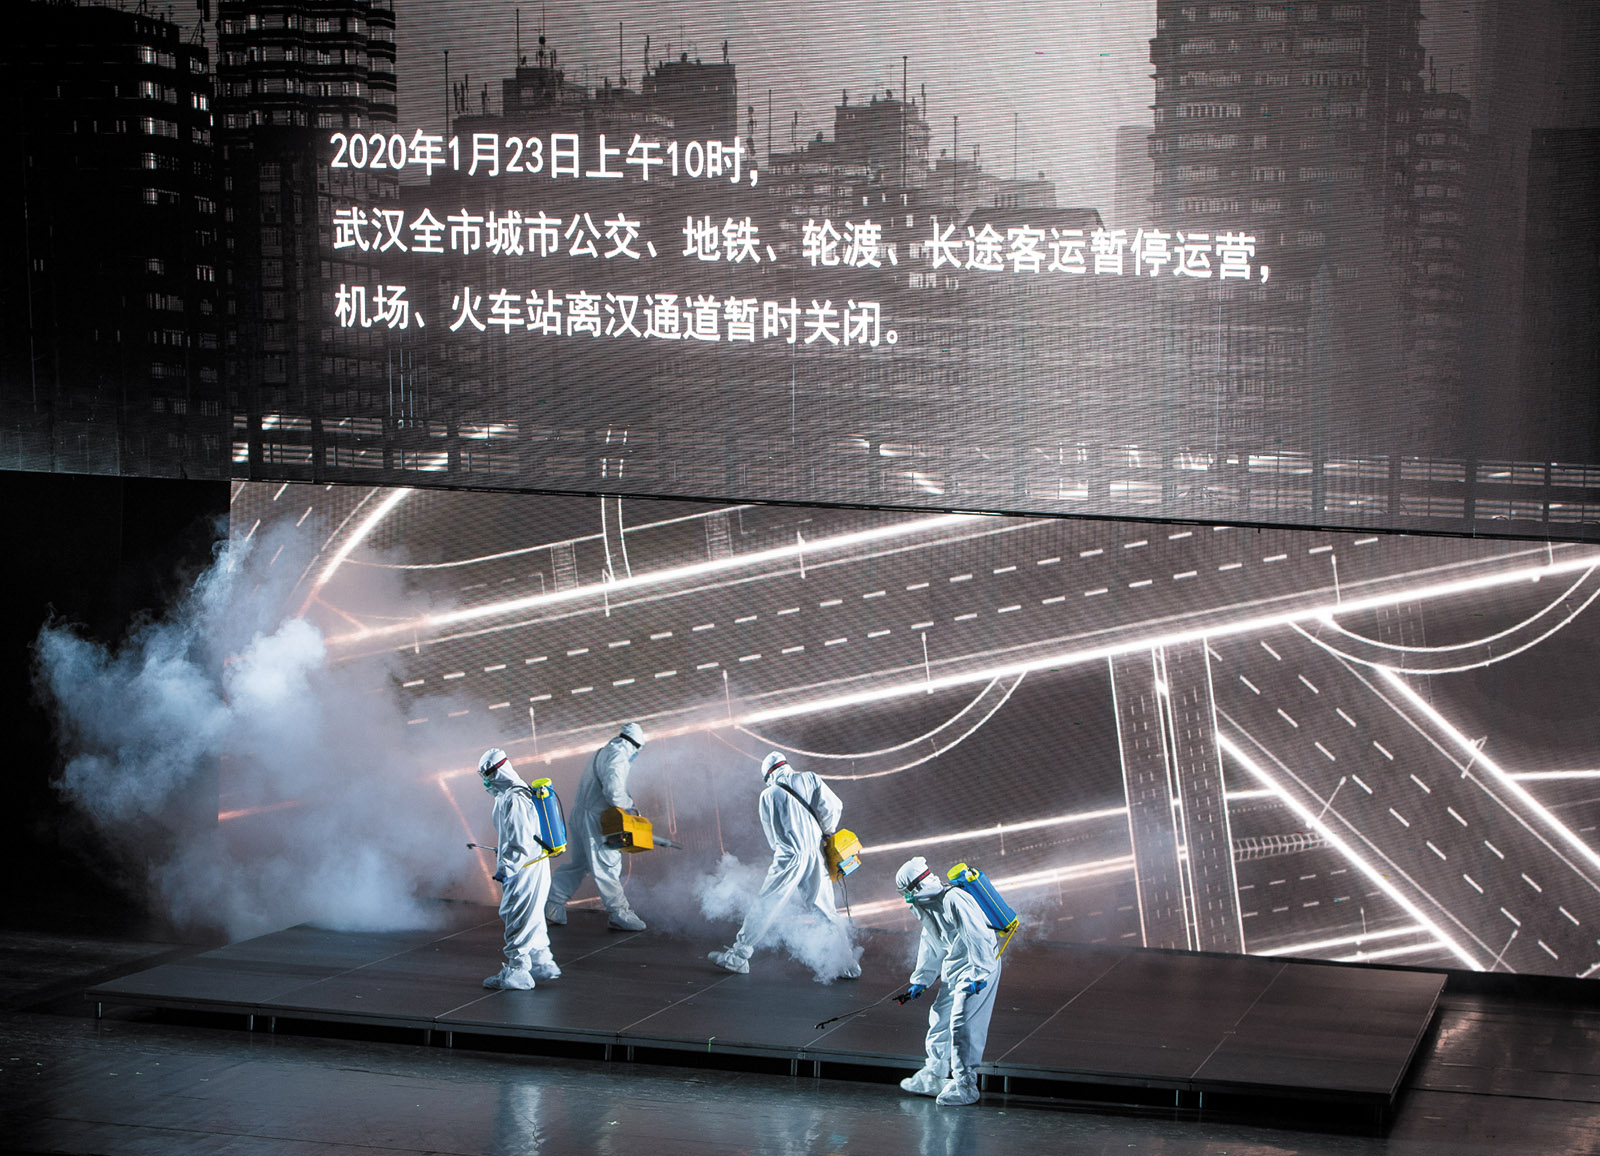 Actors from the People’s Art Theater of Wuhan performing in a drama about medical staff fighting Covid-19 in Wuhan, September 2020